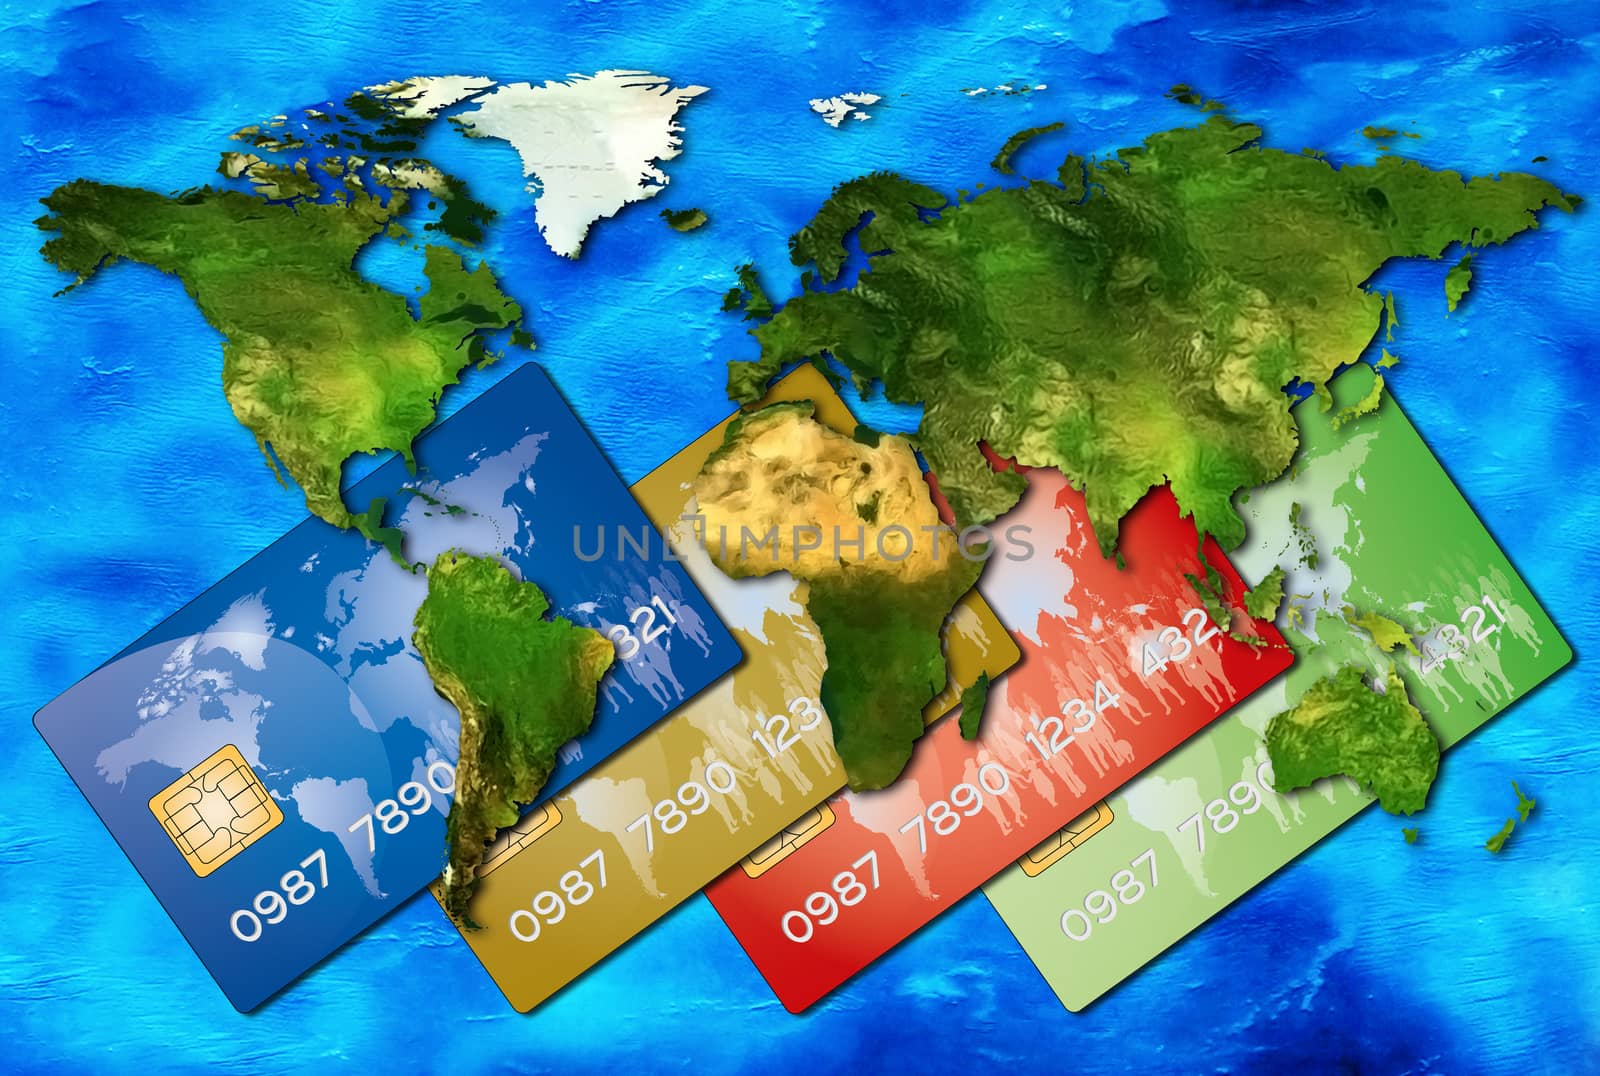 bank credit cards in the world on a world map with all the coasts and oceans of planet earth